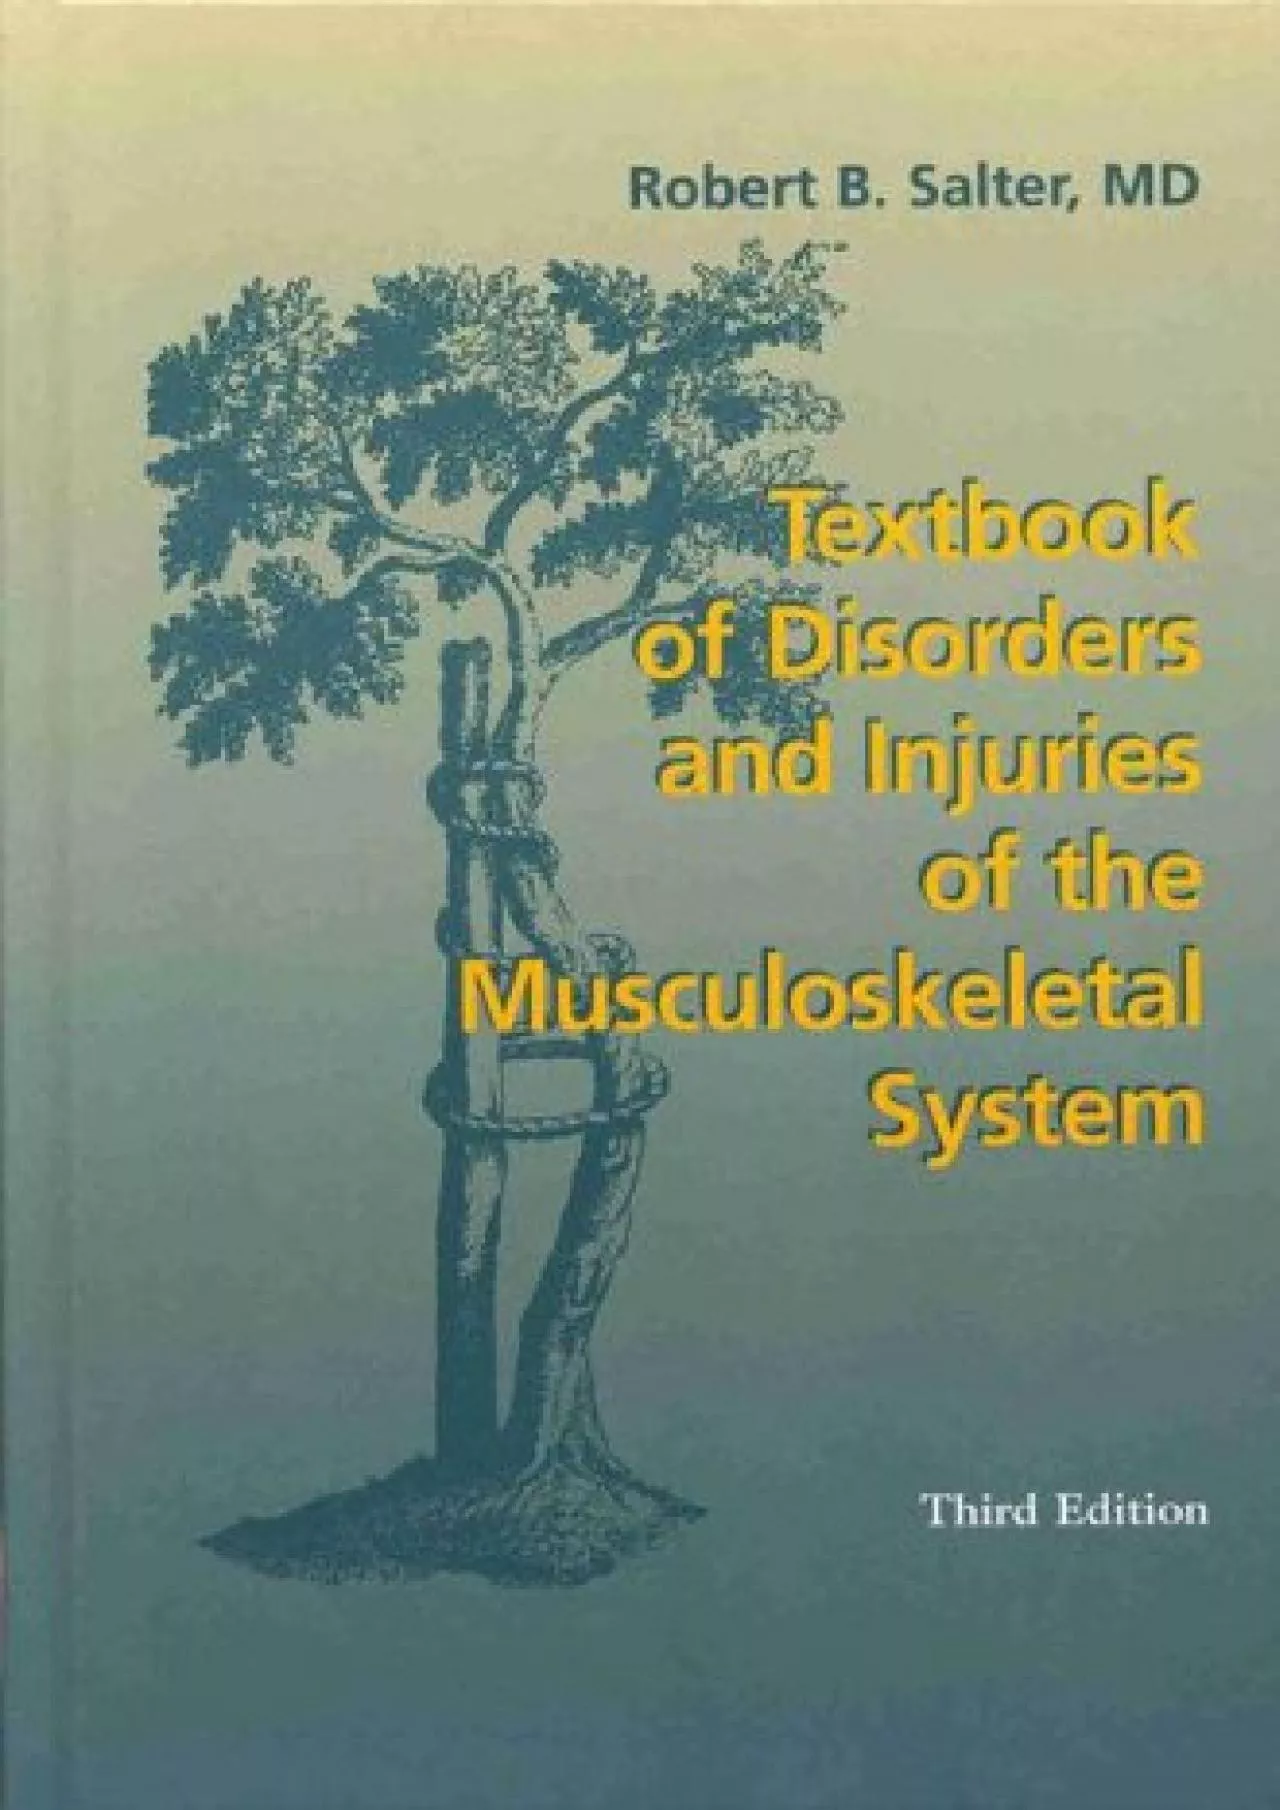 (BOOK)-Textbook of Disorders and Injuries of the Musculoskeletal System